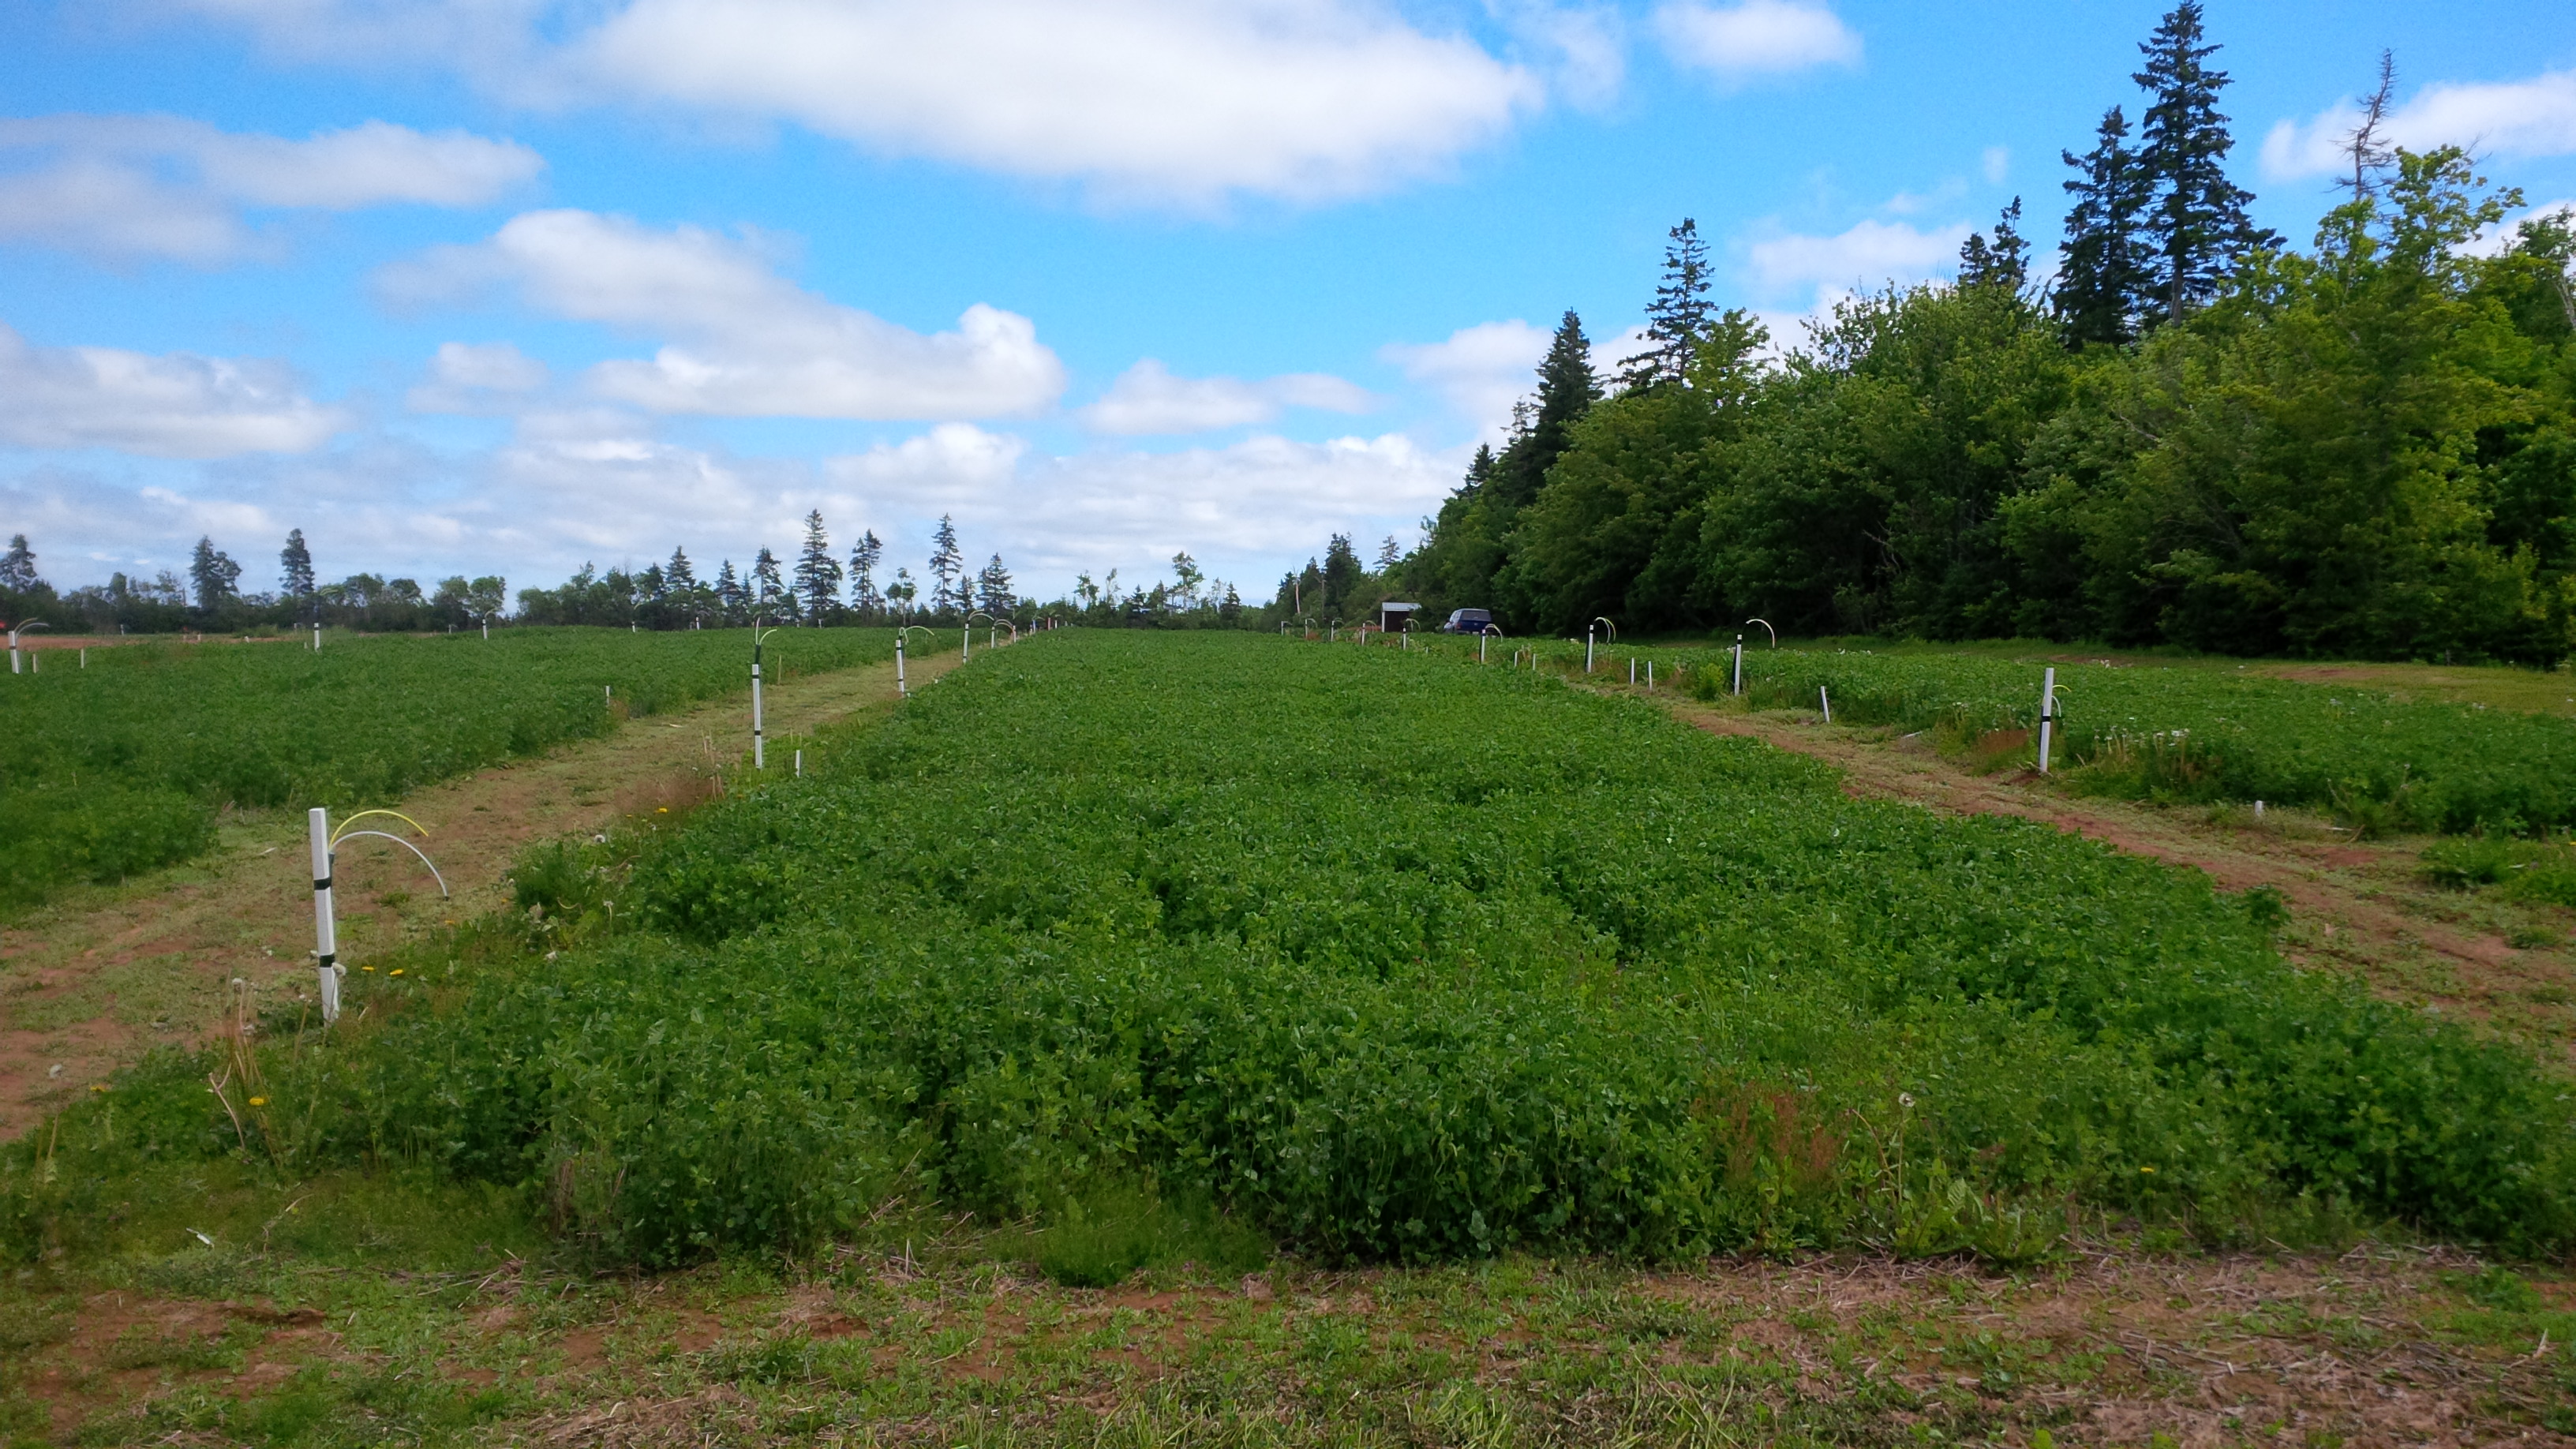 A field of red clover plants.